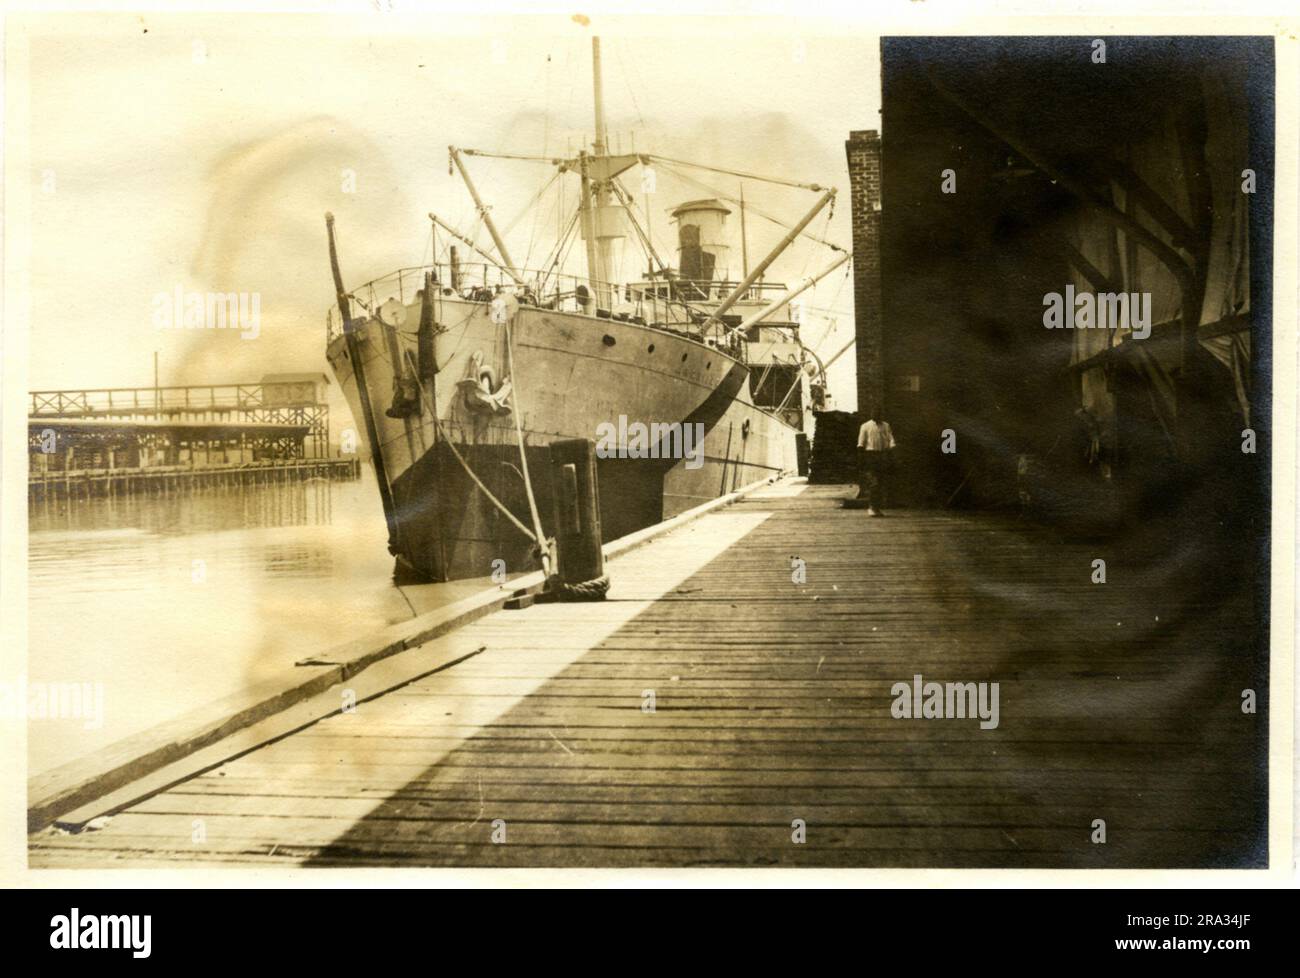 Photograph of the Port View of the SS Architect. Port View. Date: - July 29, 1918. Photograph Of; - S. S. Architect. Nationality: - British. Tonnage: -6736. Captain: - W. N. Rushforth. Owners: - T. & J. Harrison. Where From: - Plymouth, Eng. Destination: - Liverpool, Eng. Bordeux Bordeaux, France.? Where Photographed: - Savannah, GA. Sixth Naval District. By Whom Photographed: - J. B. Dearborn. Date Photographed: - July 12th., 1918. Where Camouflaged: - West Hartlepool, Eng. Date: - June 7th., 1918. By Whom: - Gray Shipbuilding Co. Type Of Ship: - Well Deck. Beam: 52 ft., Length: -410 ft., Dra Stock Photo